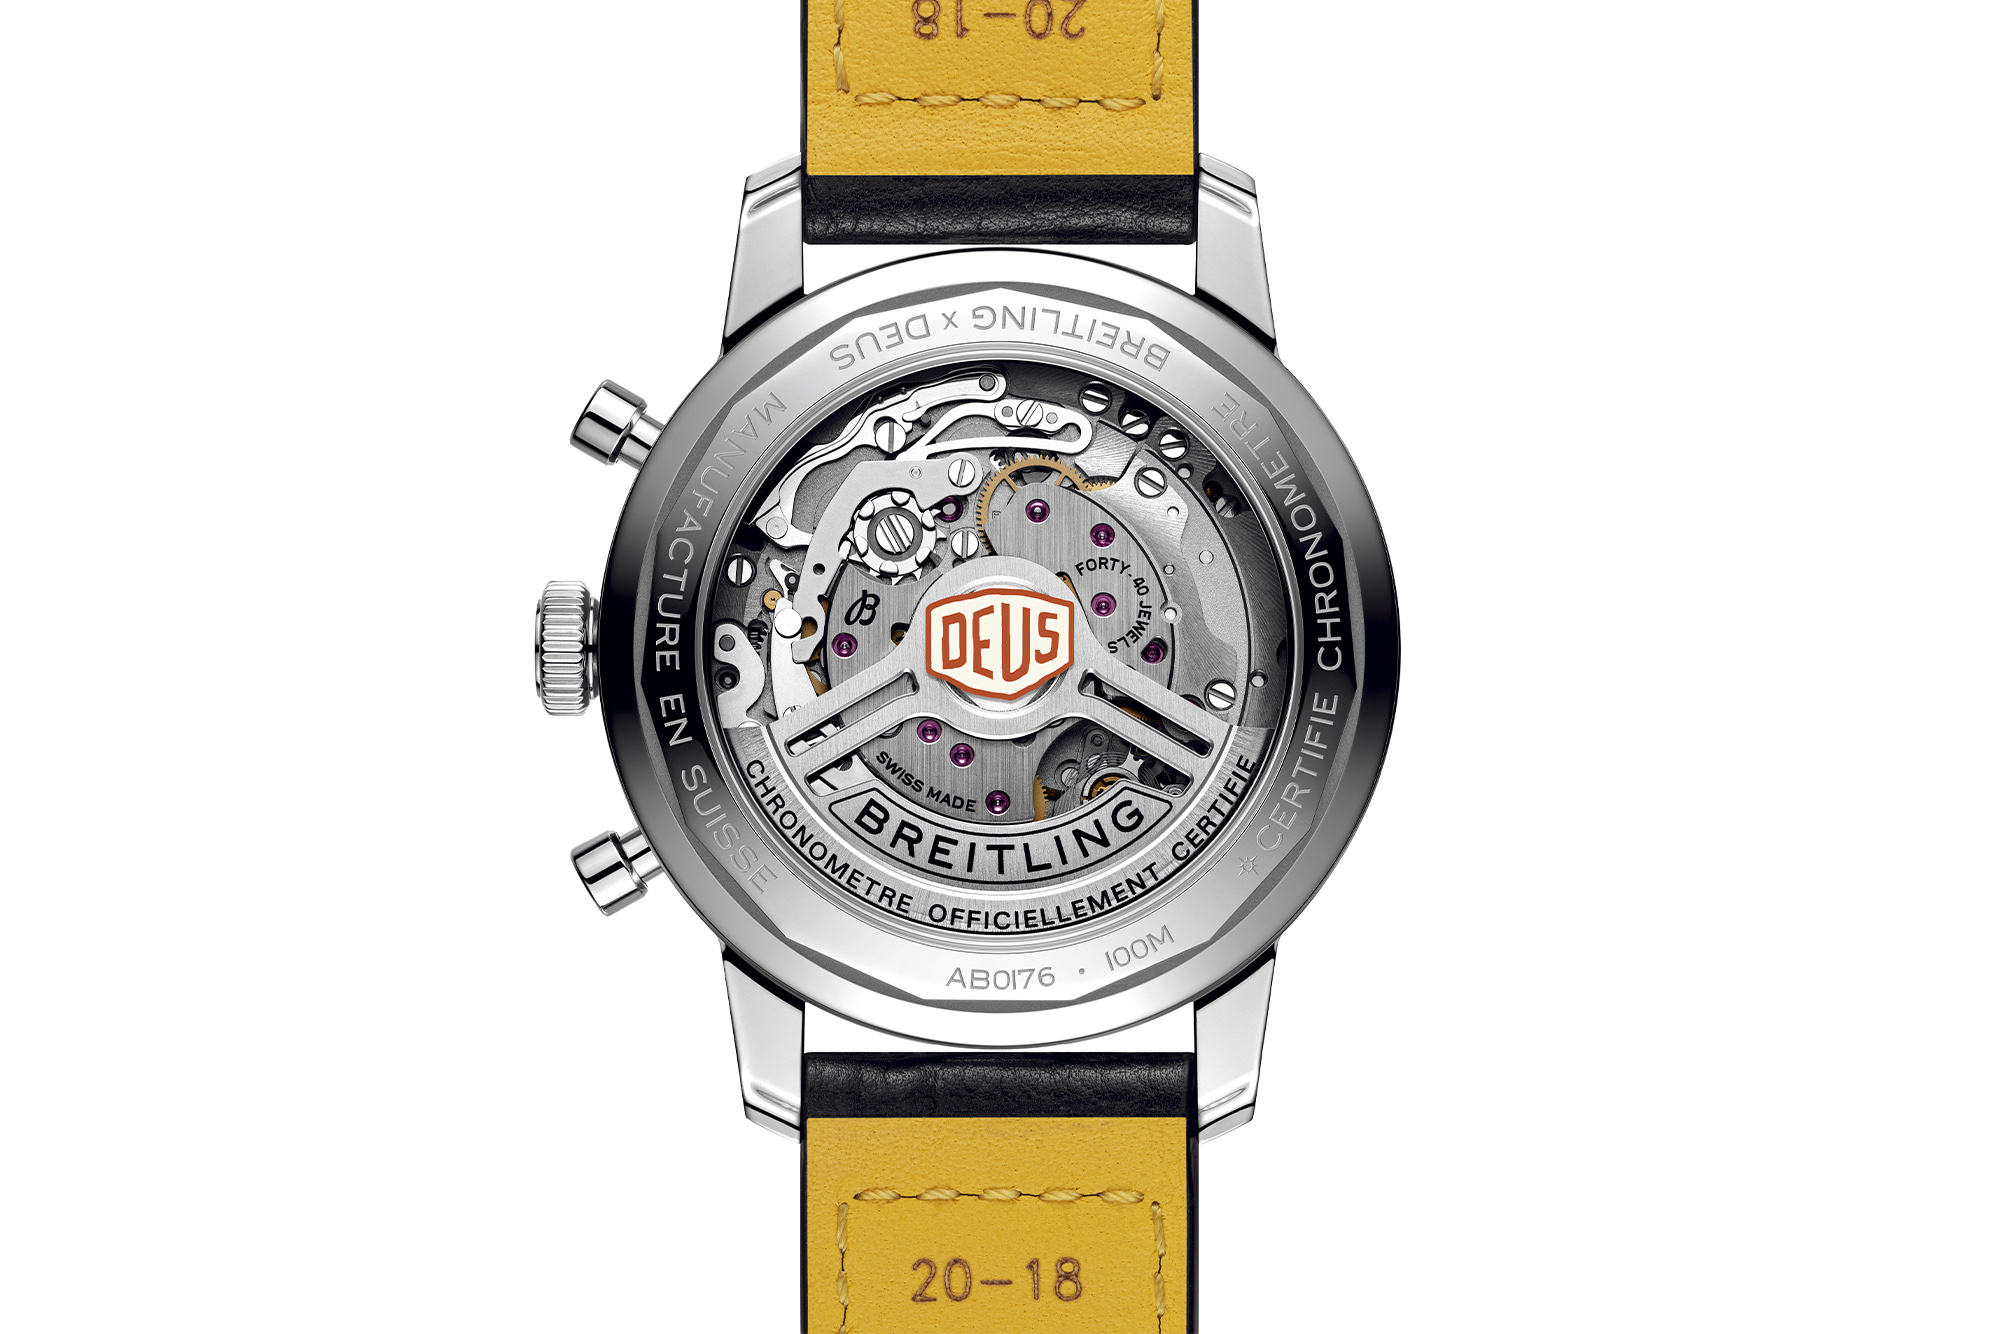 Breitling Top Time Deus backside yellow strap